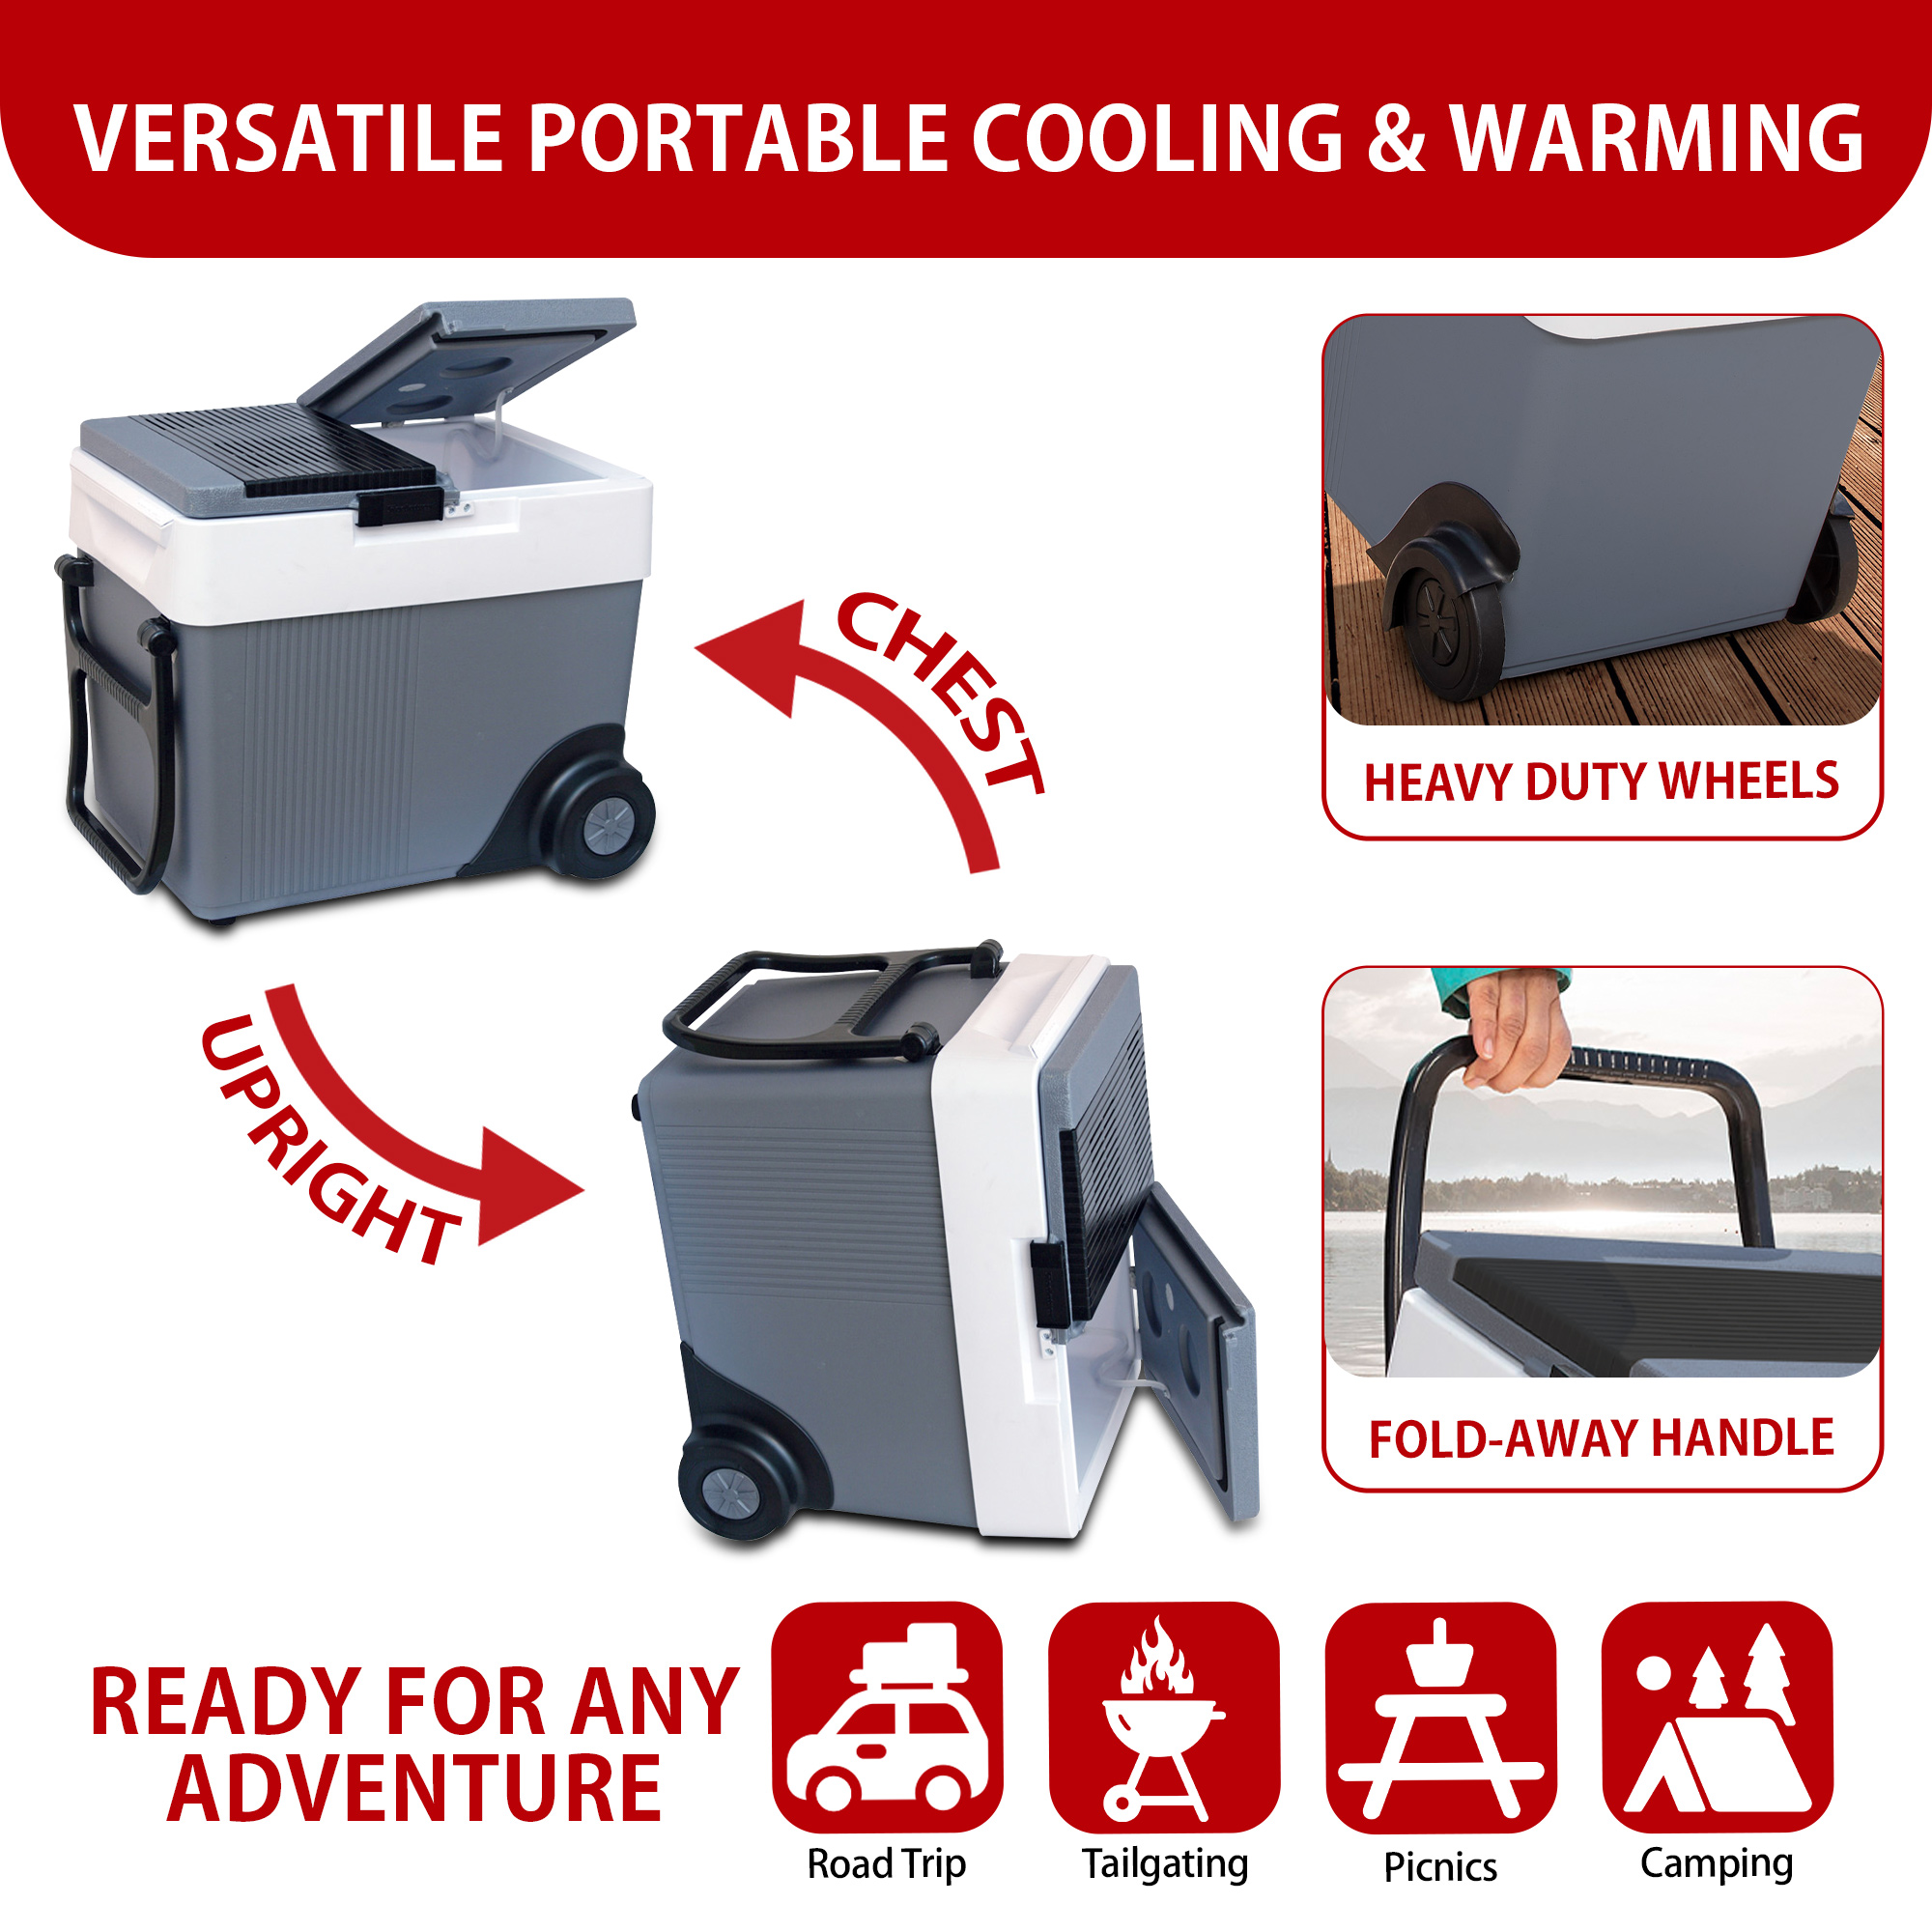 Koolatron Kargo Wheeler W65 Thermoelectric Iceless 12V Cooler Warmer, 31L / 33 Quart Capacity, Grey, For Camping, Travel, Truck, SUV, Car, Boat, RV, Trailer, Tailgating, Made in North America - image 4 of 6